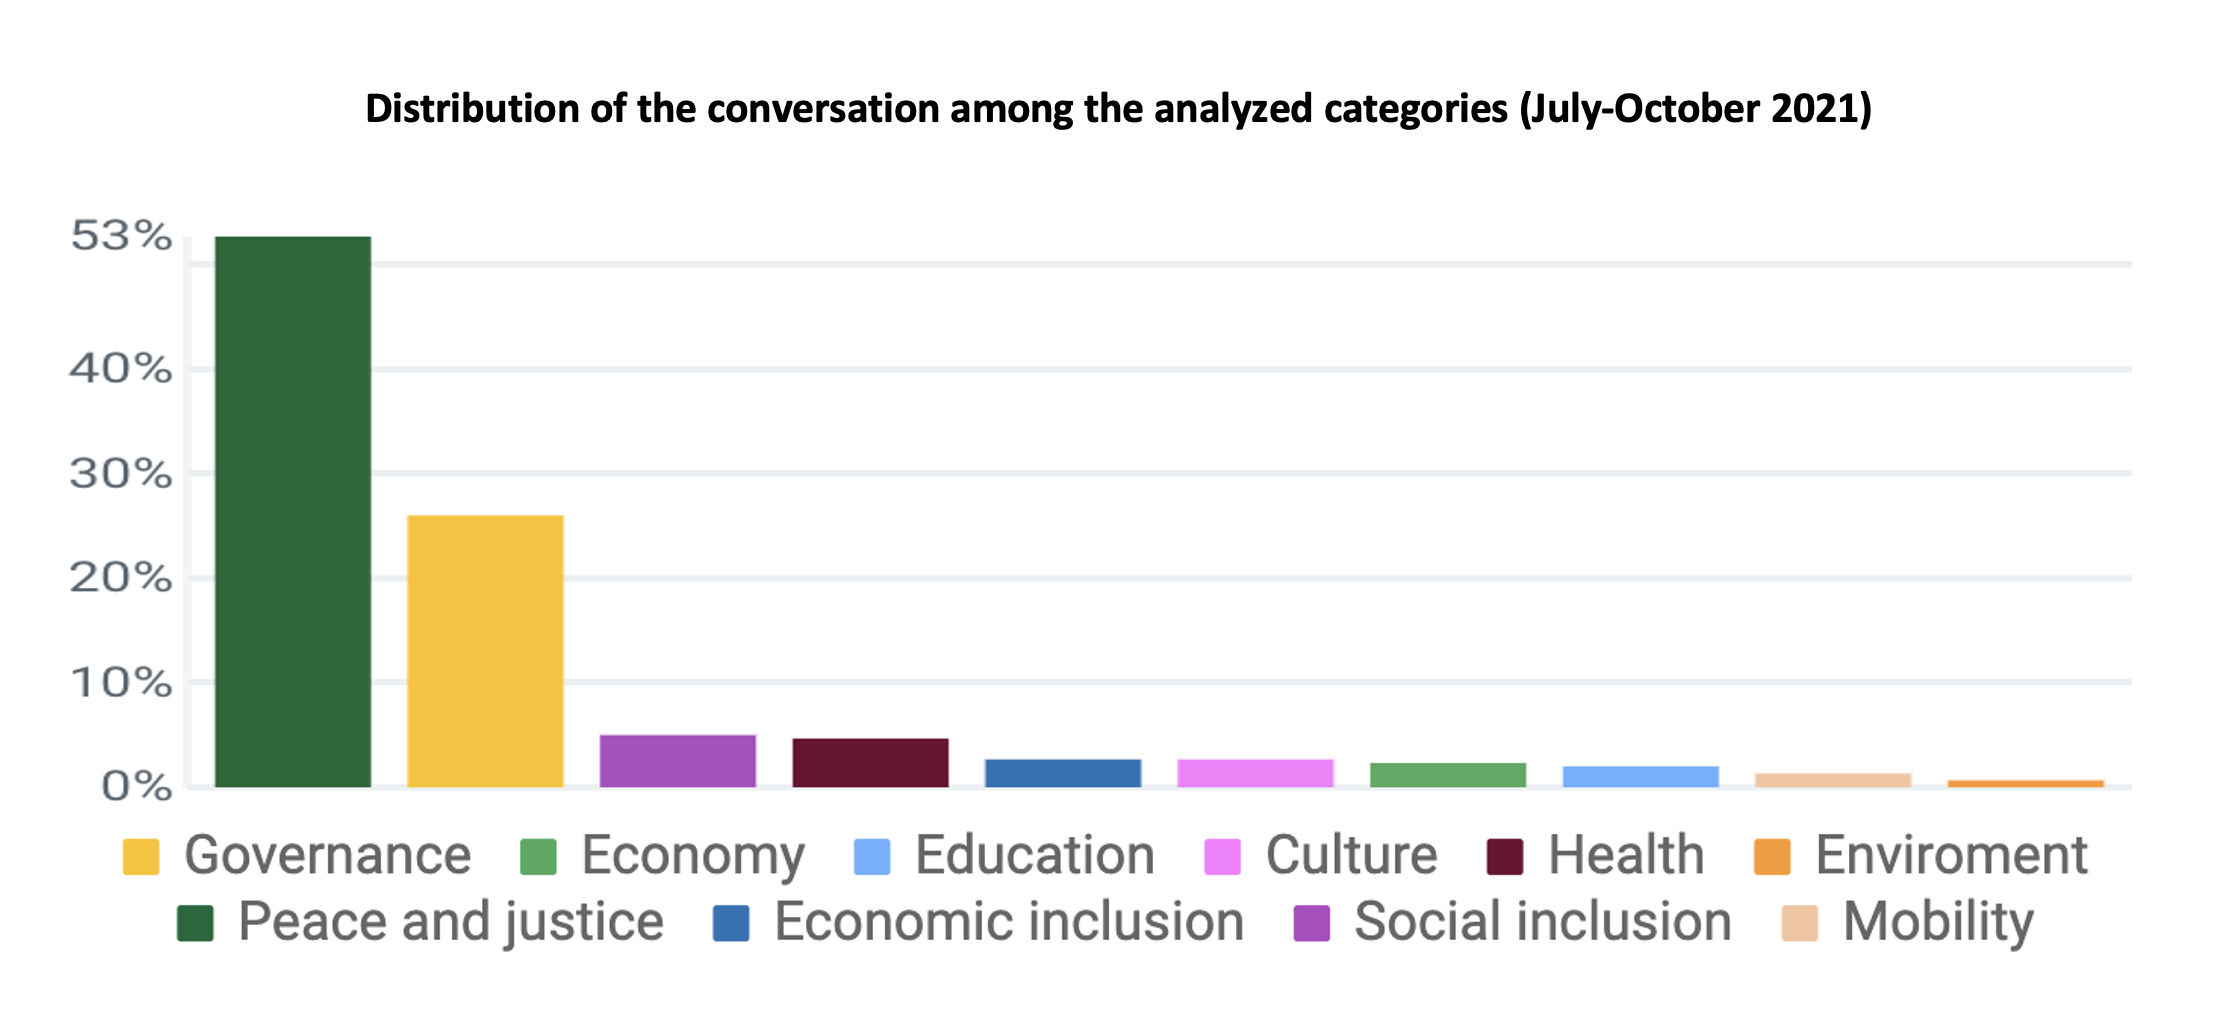 Distribution of the conversation among the analyzed categories from July to October 2021 - Statistics show - Peace and Justice = 53%, Governance = 27%, Social Inclusion = 5%, Health = 4.5%, Economic Inclusion = 2.5%, Culture = 2.5%, Economy = 2%, Education = 1.75%, Mobility = 1.25%, Environment = 1%